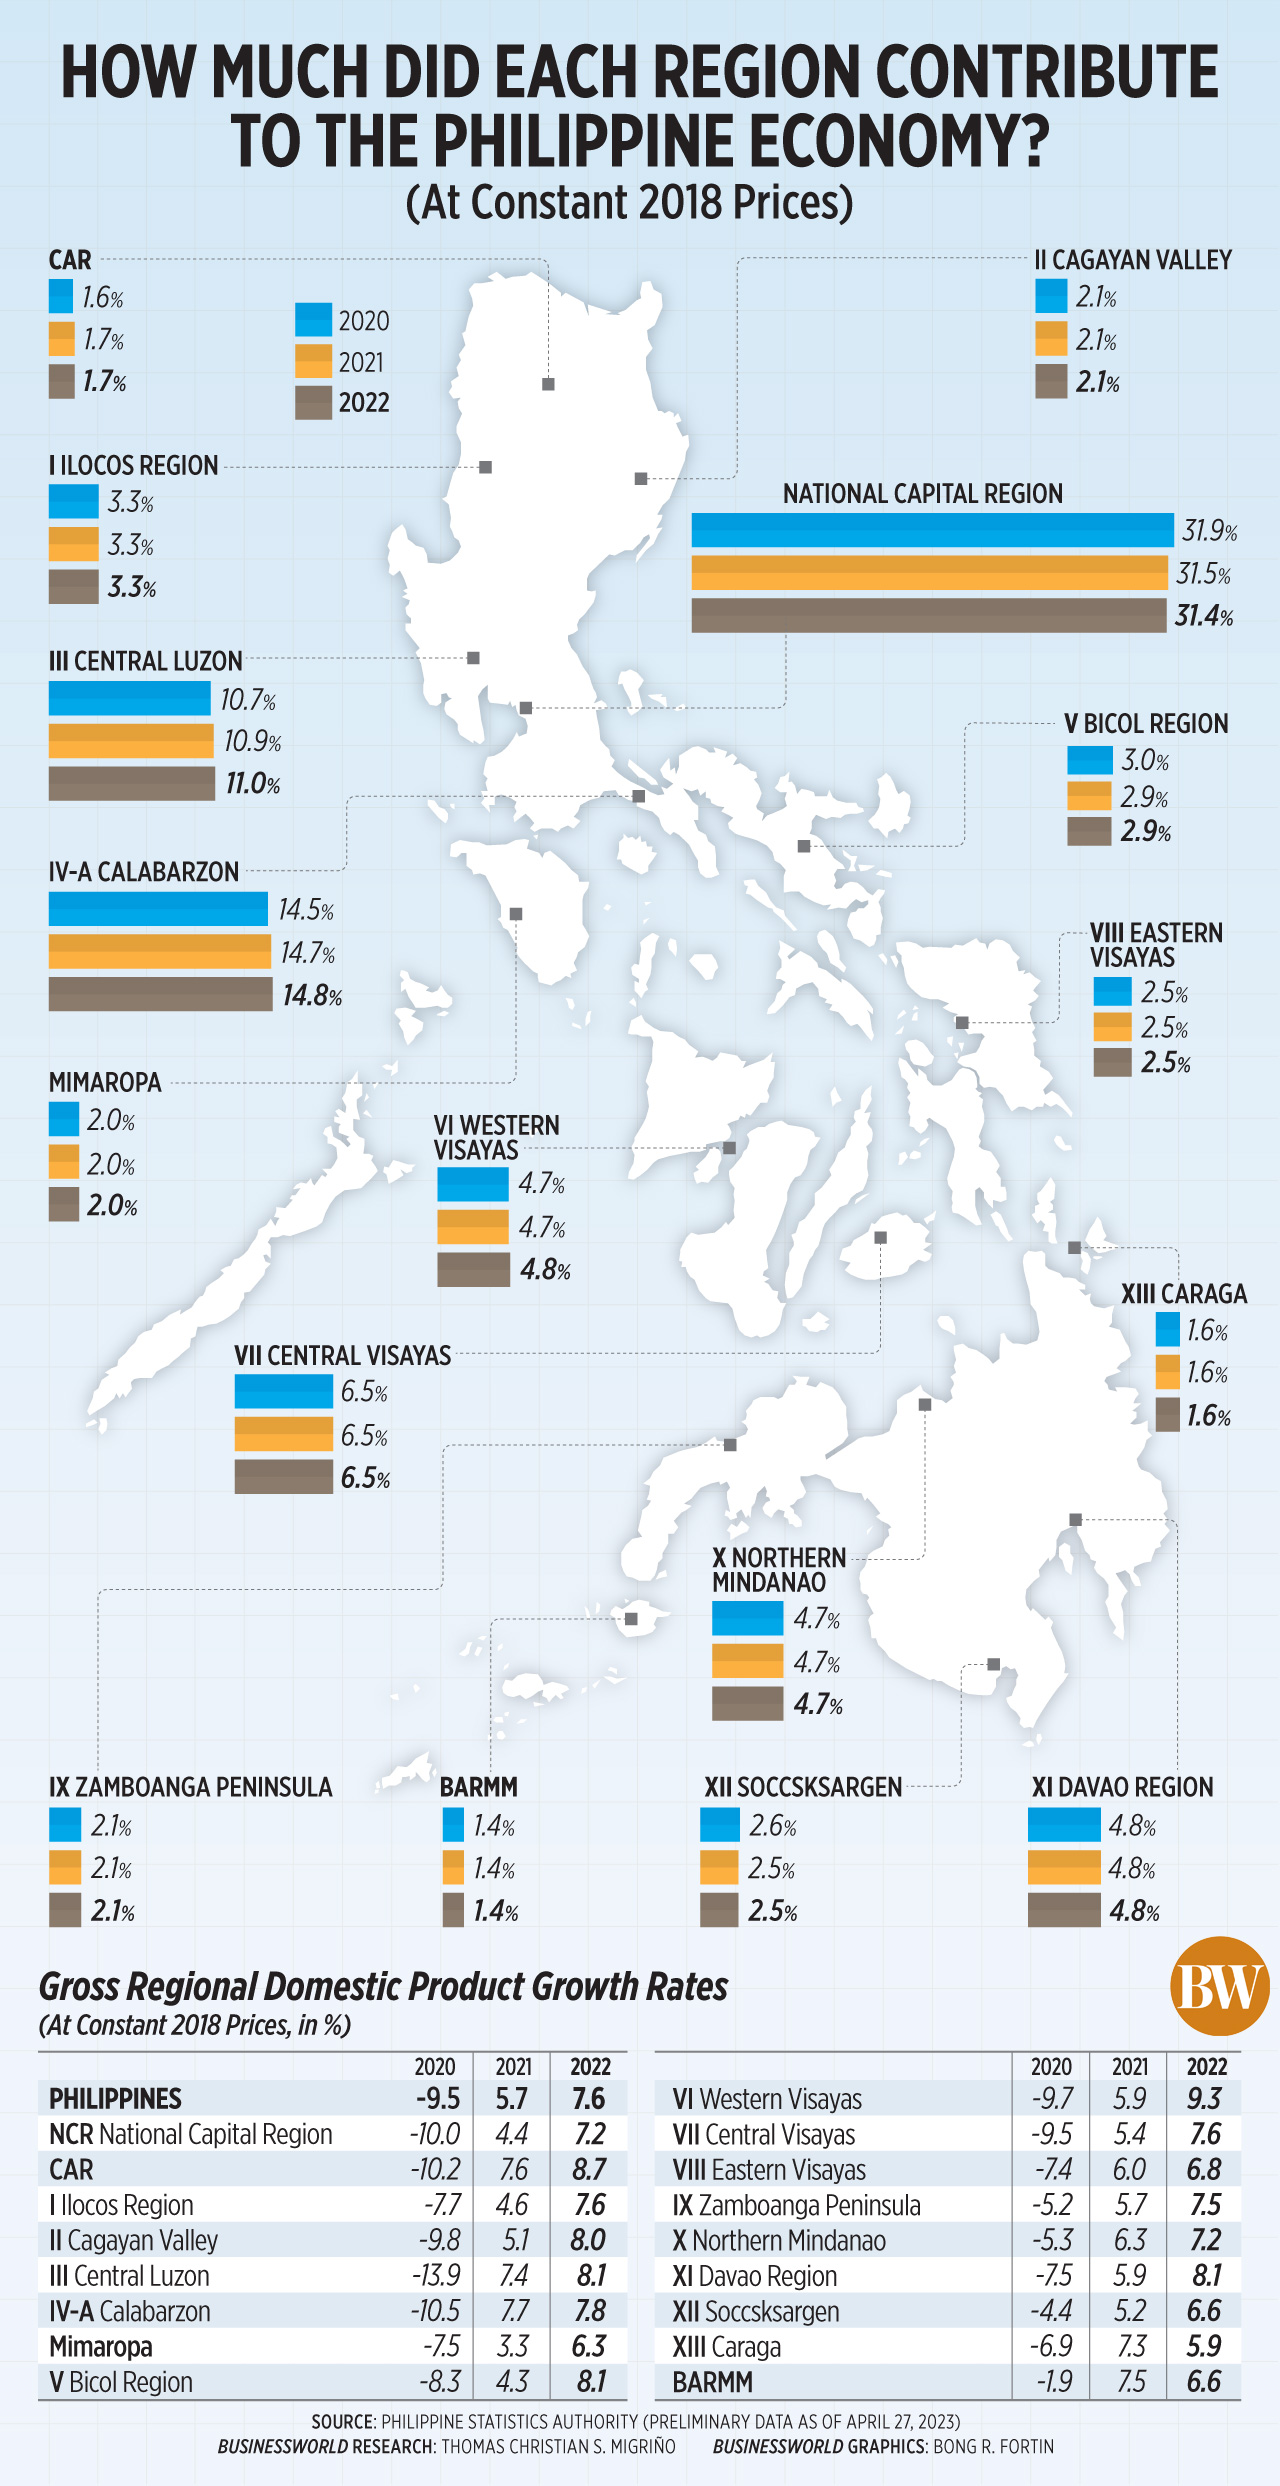 How much did each region contribute to the Philippine economy